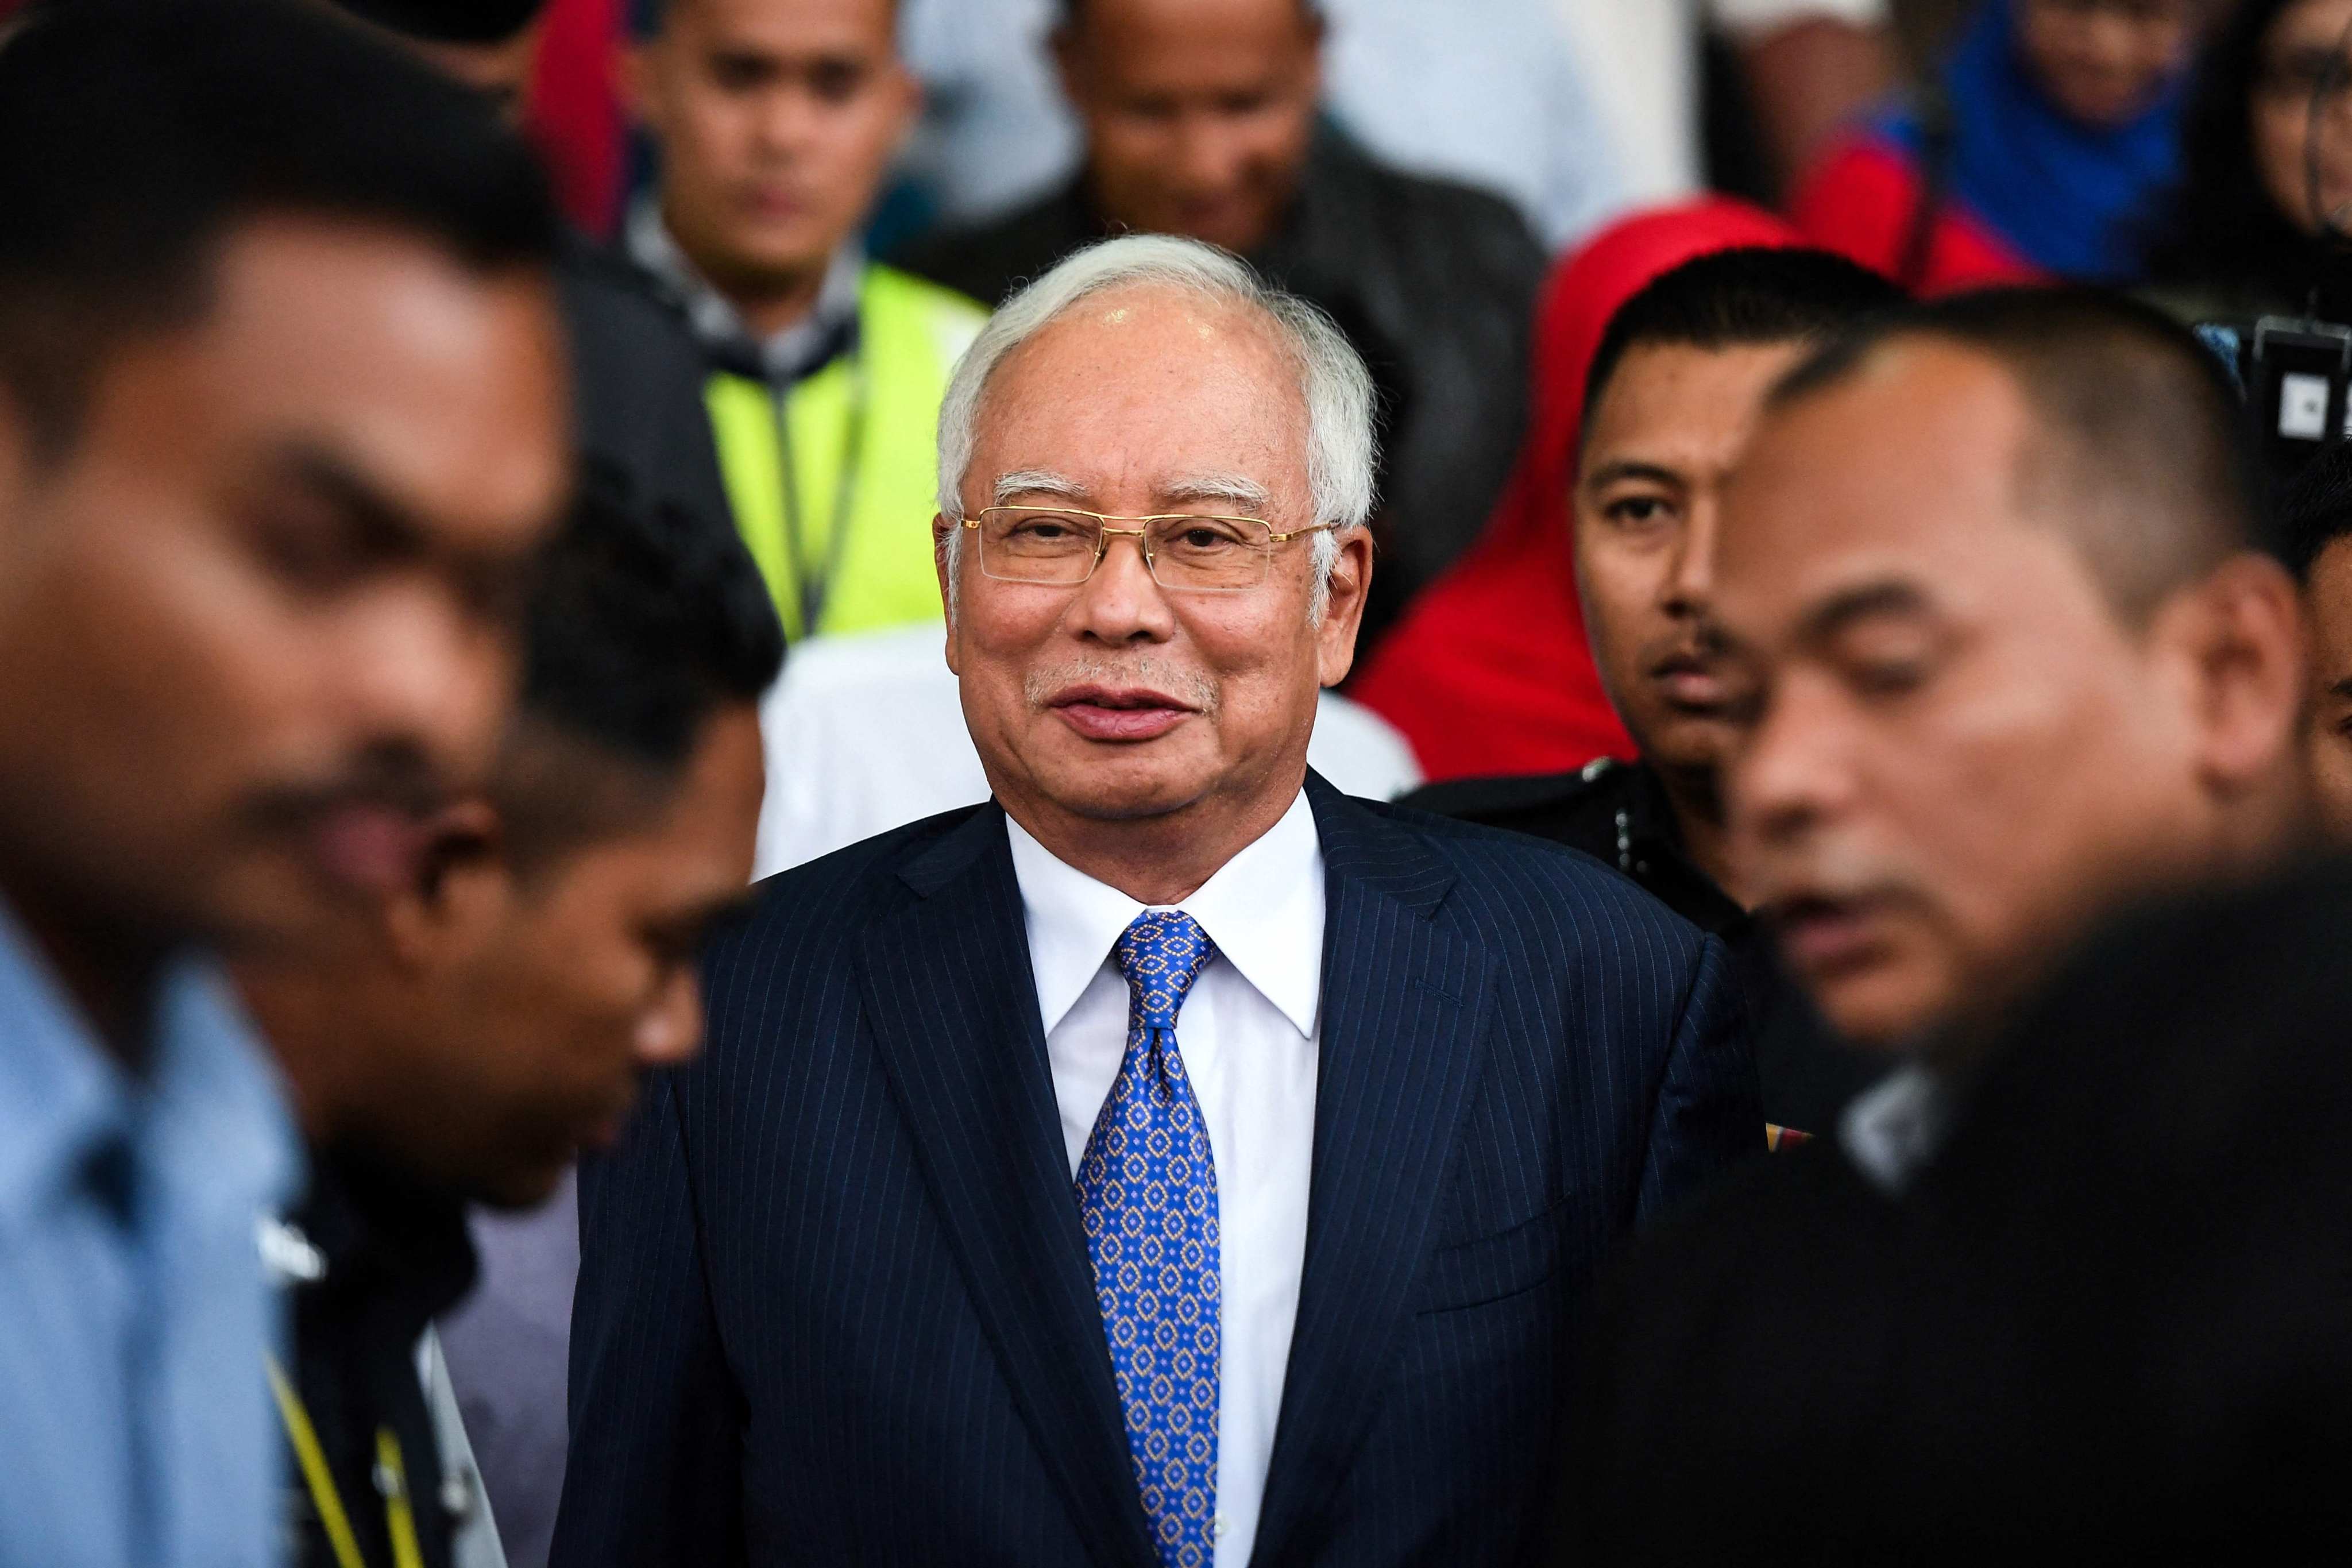 Malaysia’s former prime minister Najib Razak (centre) leaves a court in Kuala Lumpur on April 3, 2019, after facing trial in a case related to the looting of the sovereign wealth fund 1MDB. Photo: AFP